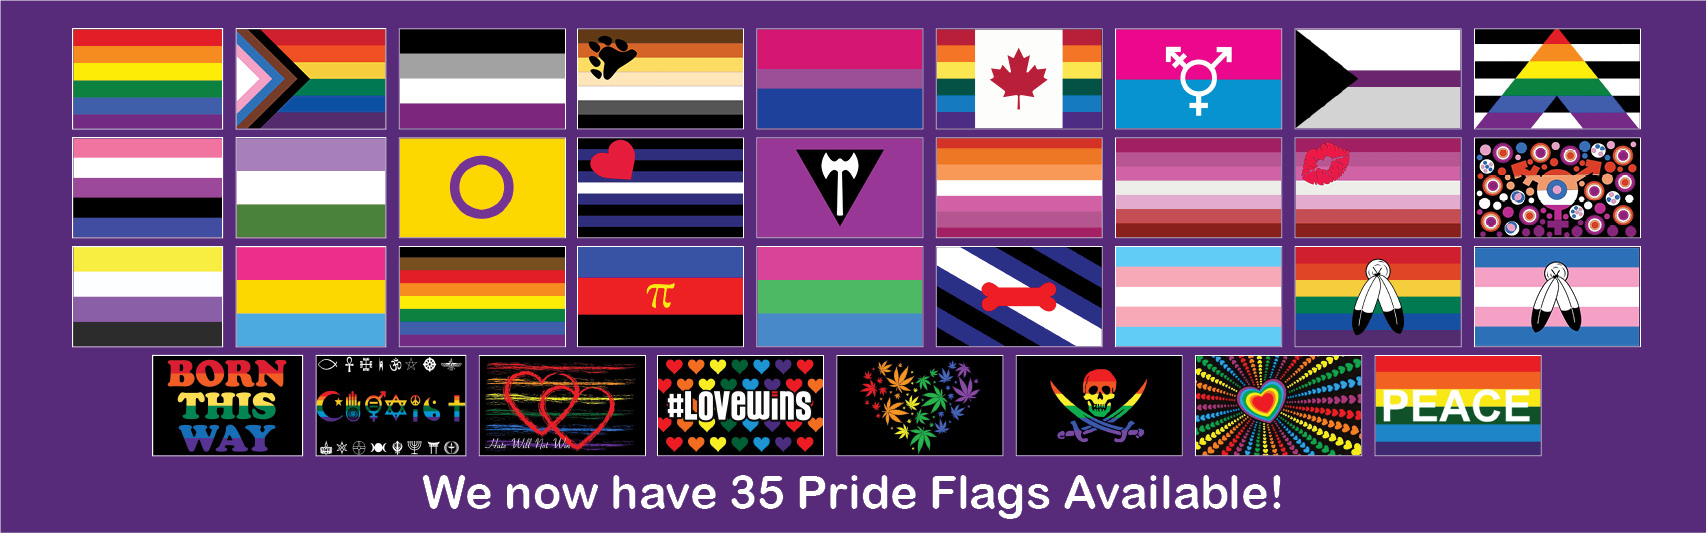 Pride Products by The Flag Shop Pride (Rainbow) Flags, Canada Pride